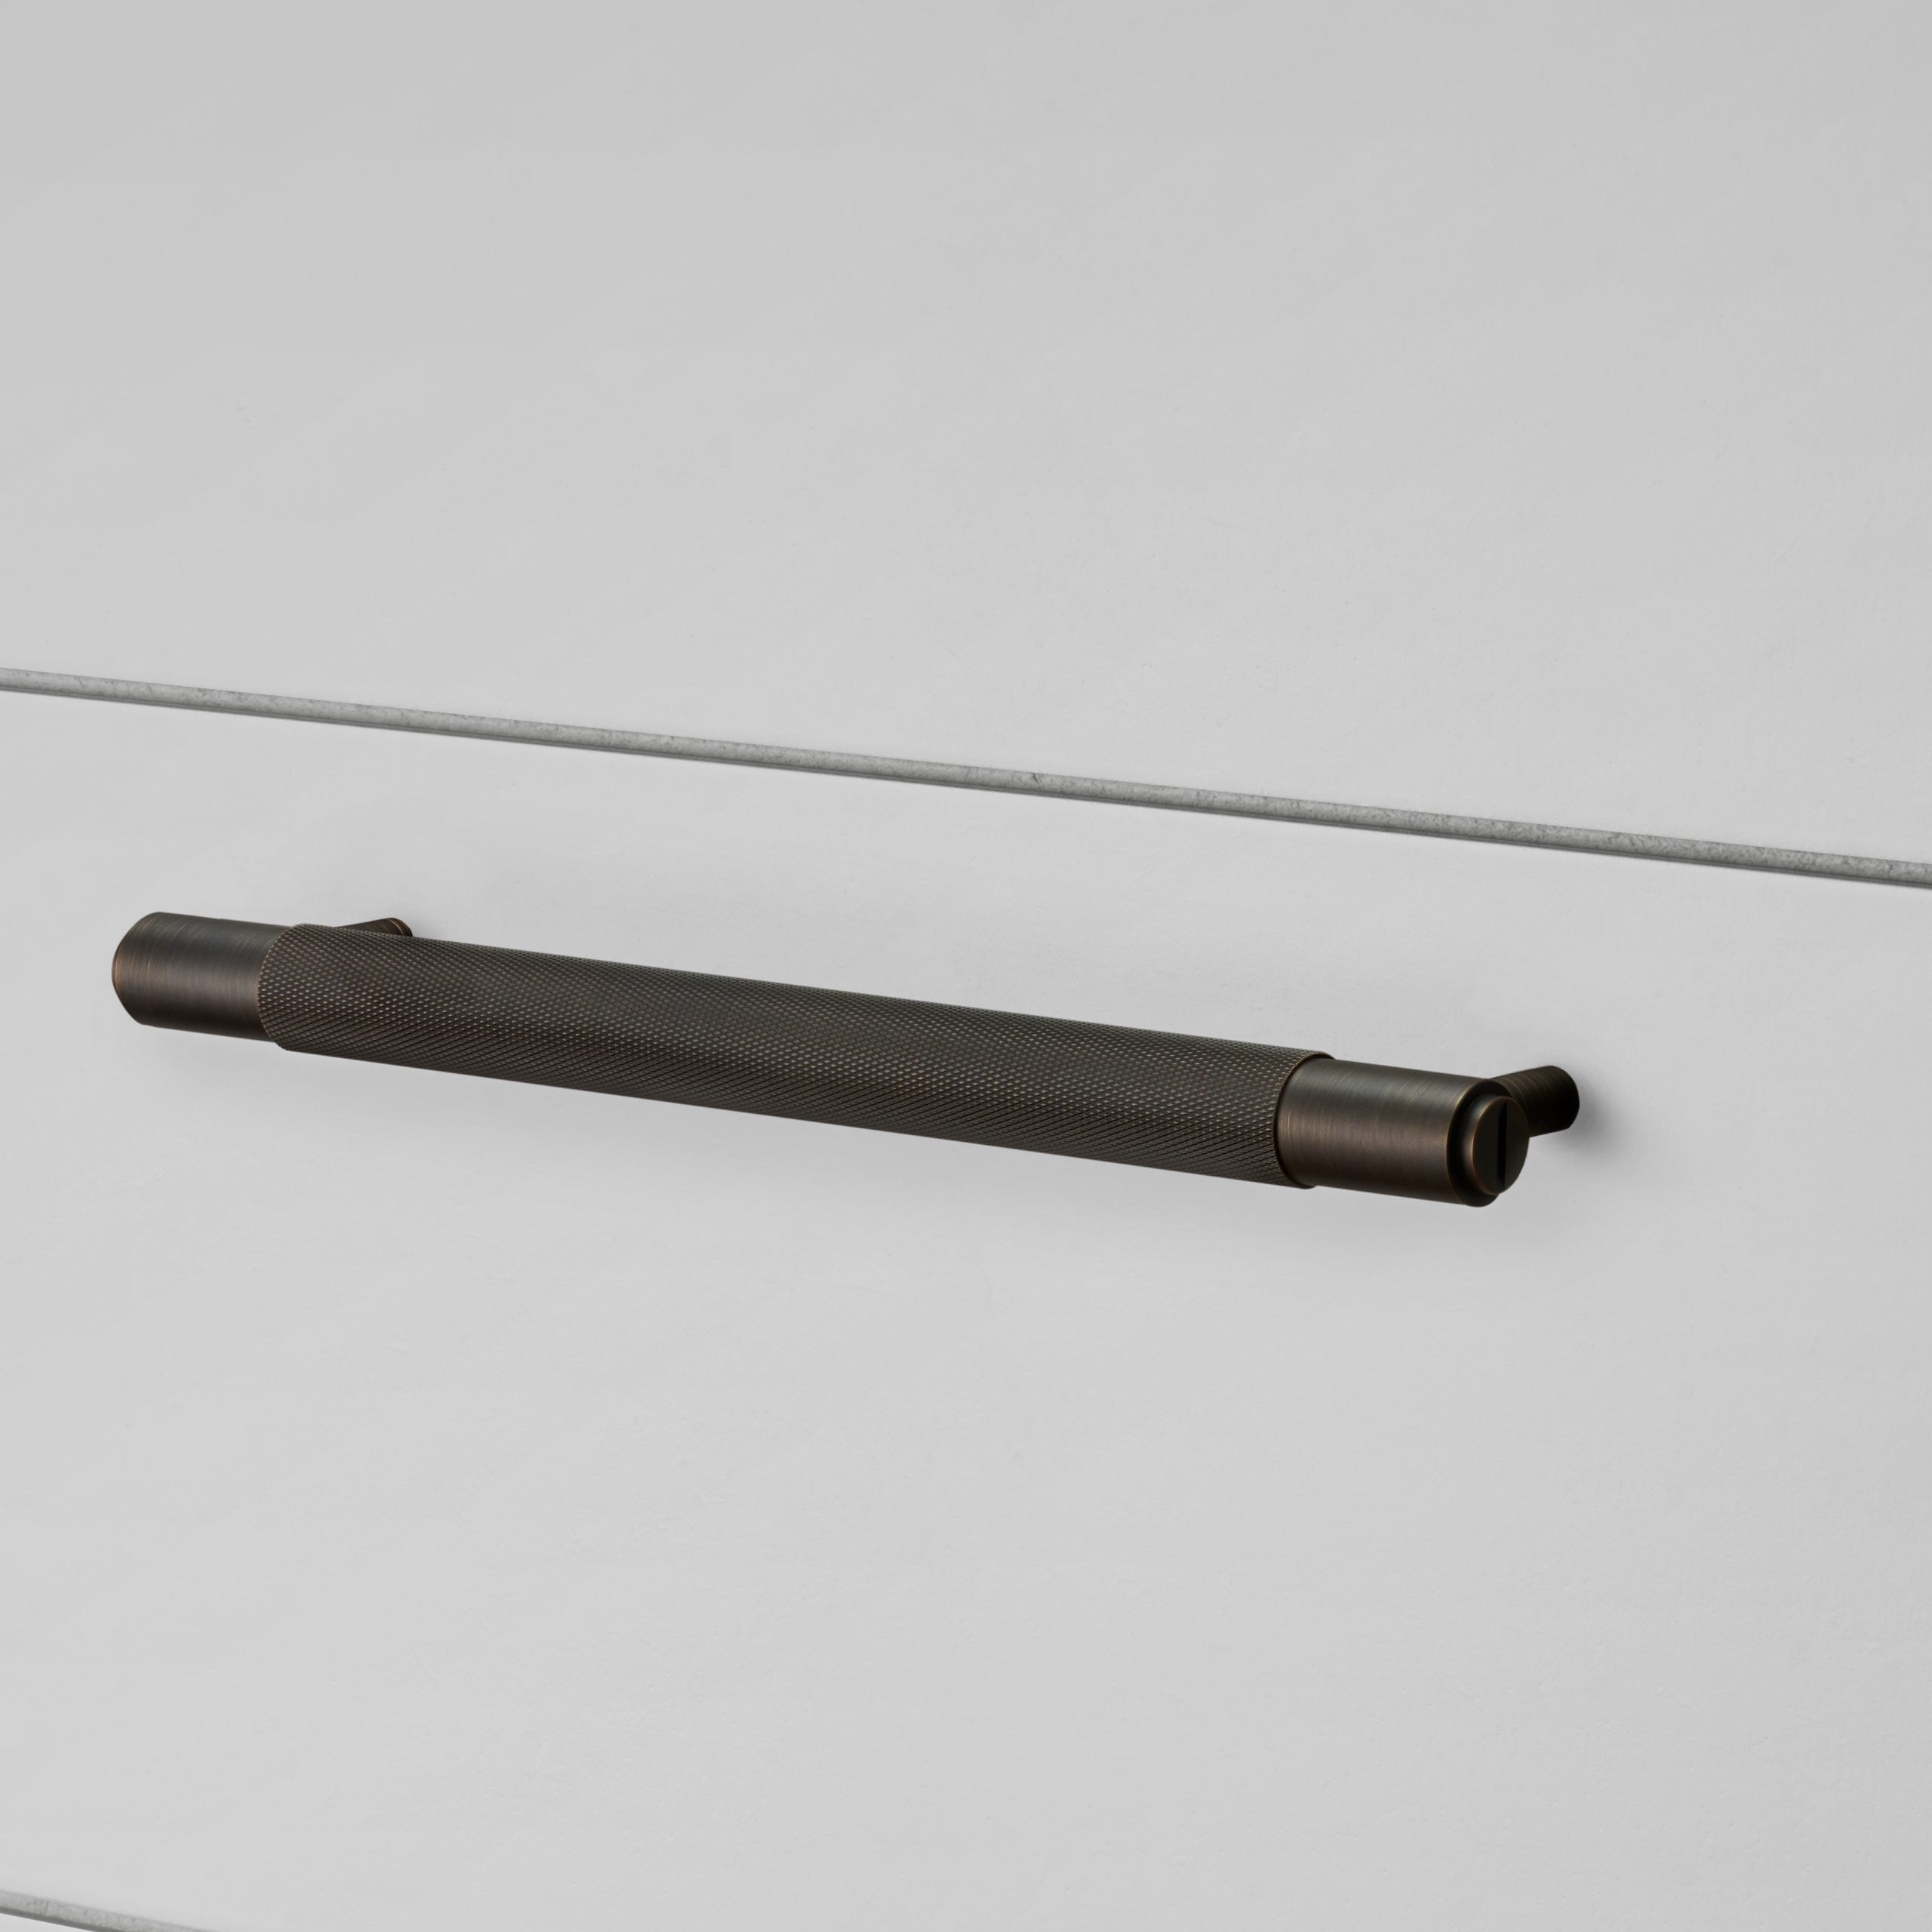 Buster + Punch Pull Bar, Cross Design, with backplate Hardware Buster + Punch Smoked Bronze 0.21x0.07x0.03 